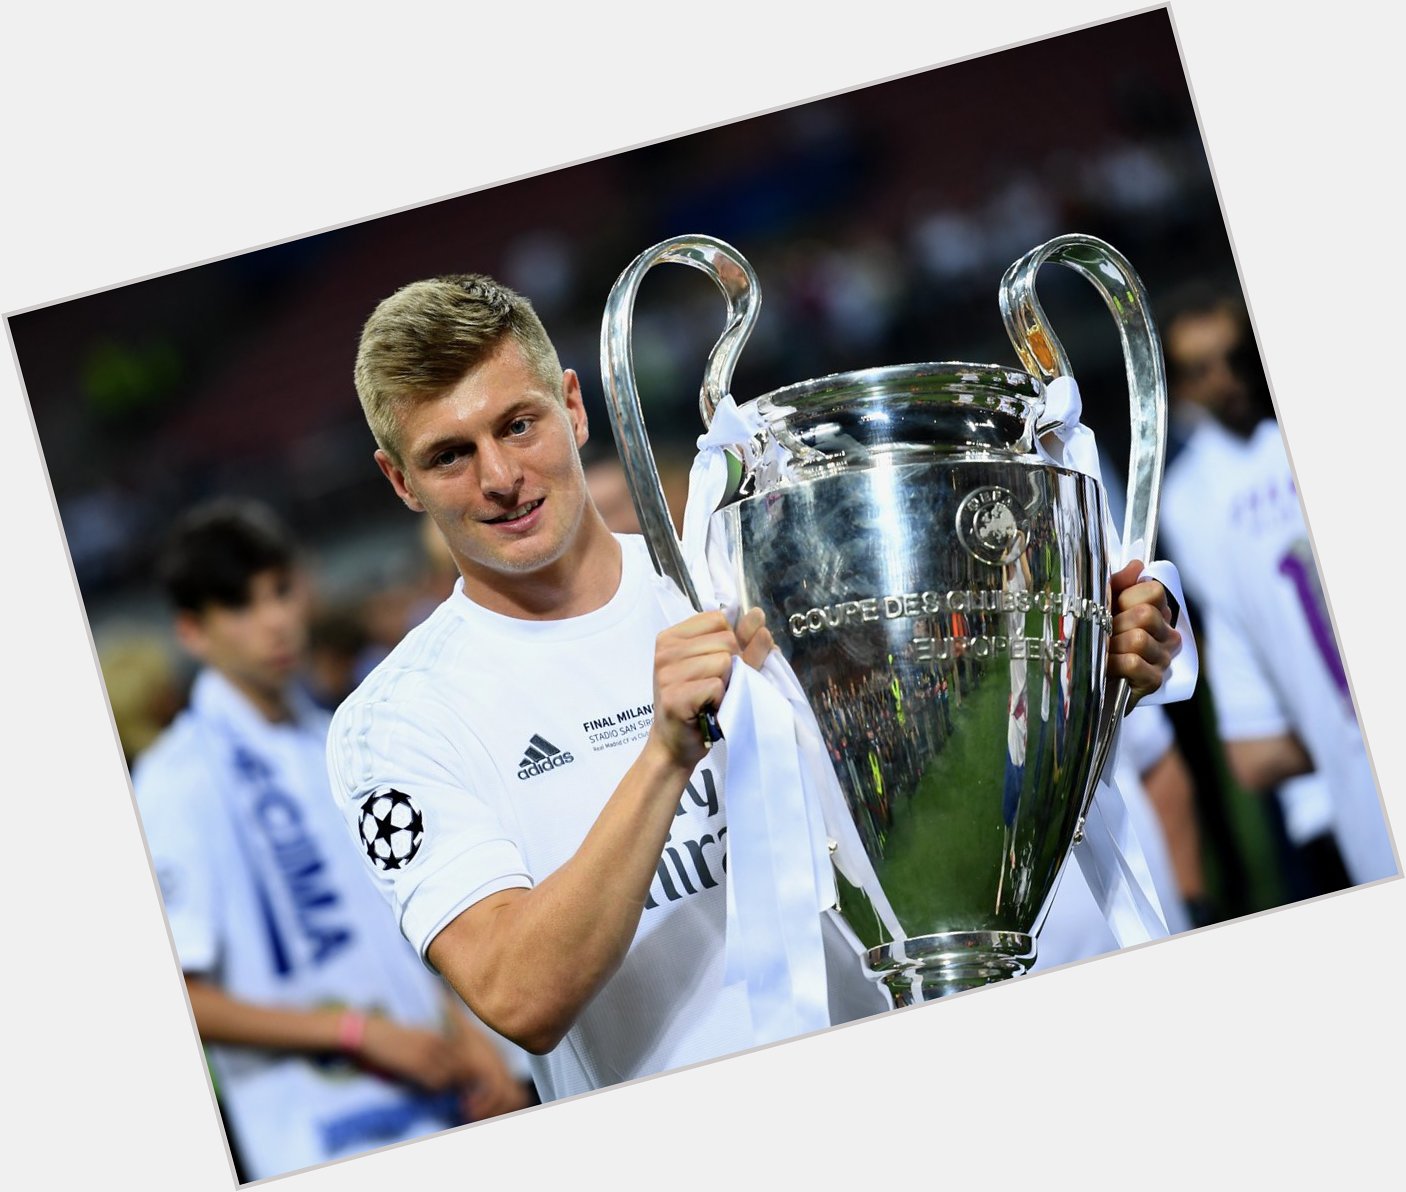  Happy Birthday, Toni Kroos !  Sending you best wishes on your 3 3 rd birthday 